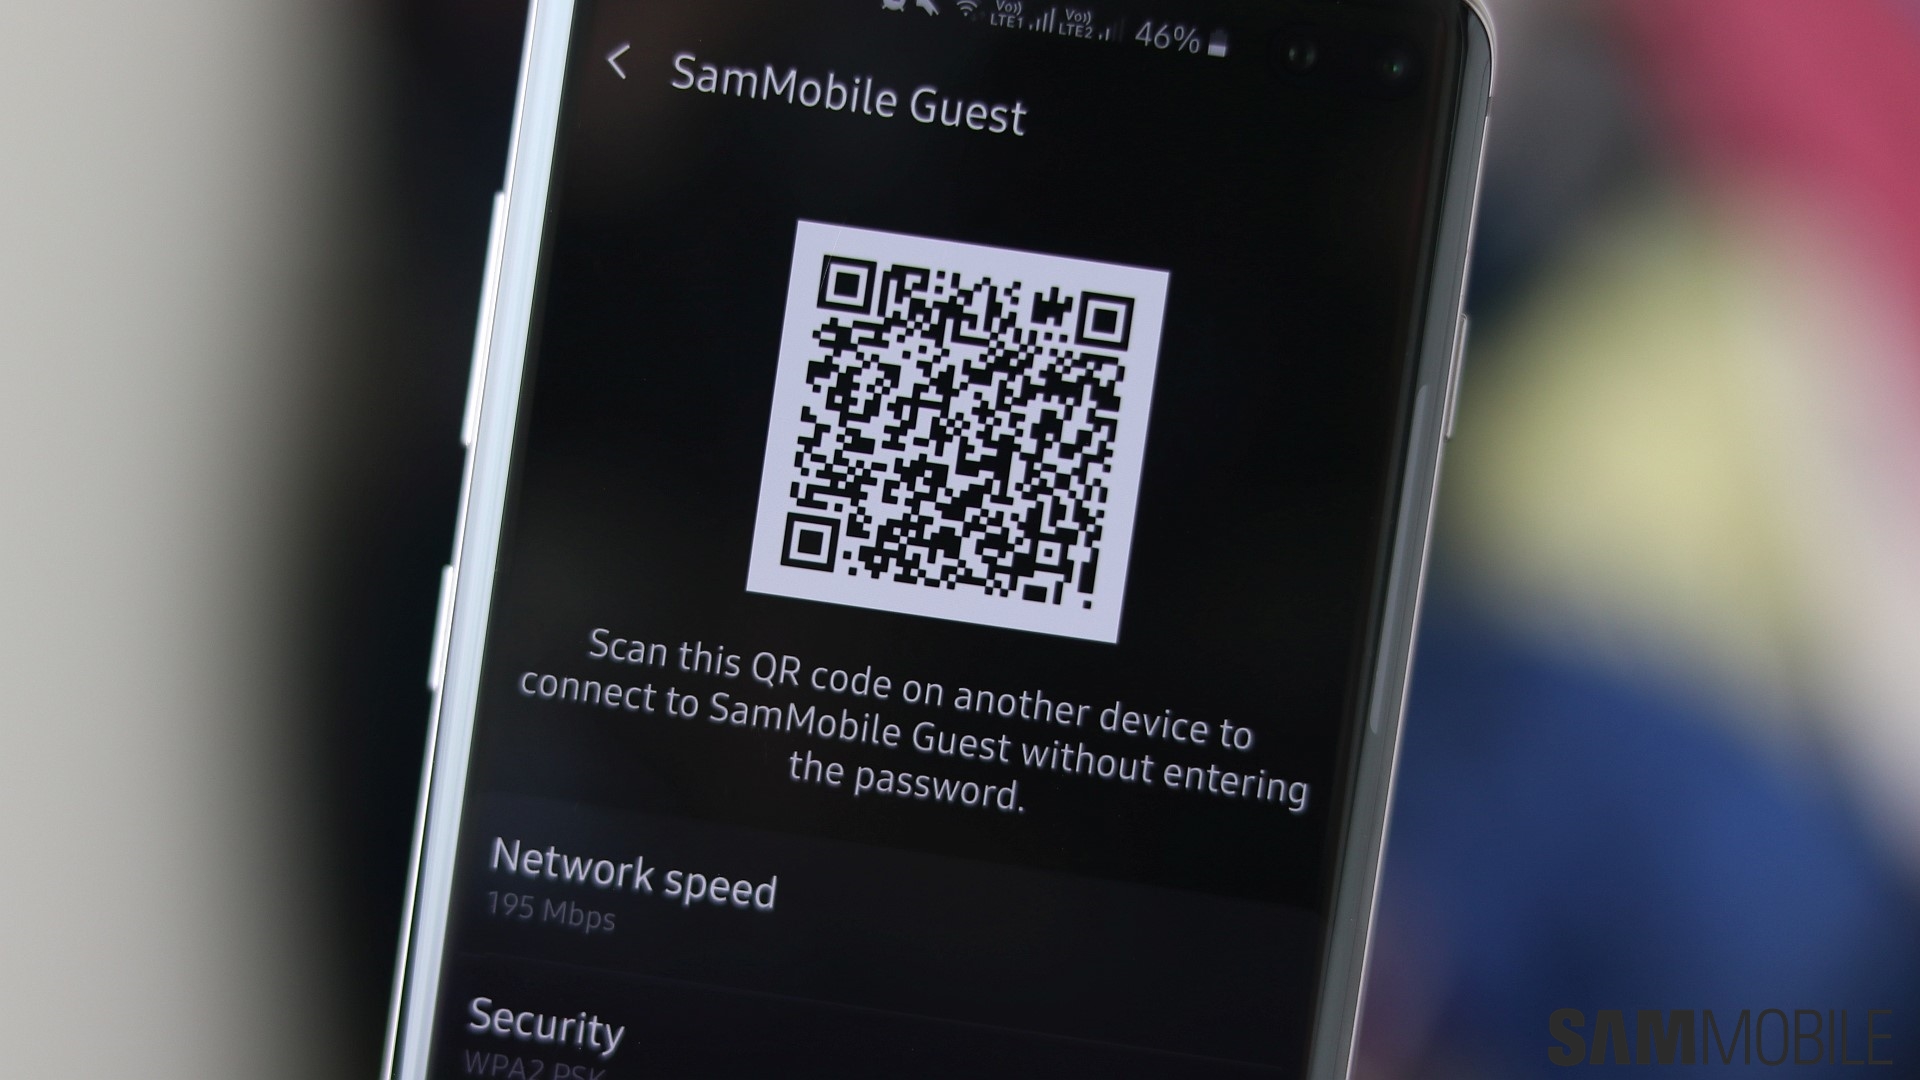 Use Secure Wi-Fi on your Galaxy phone